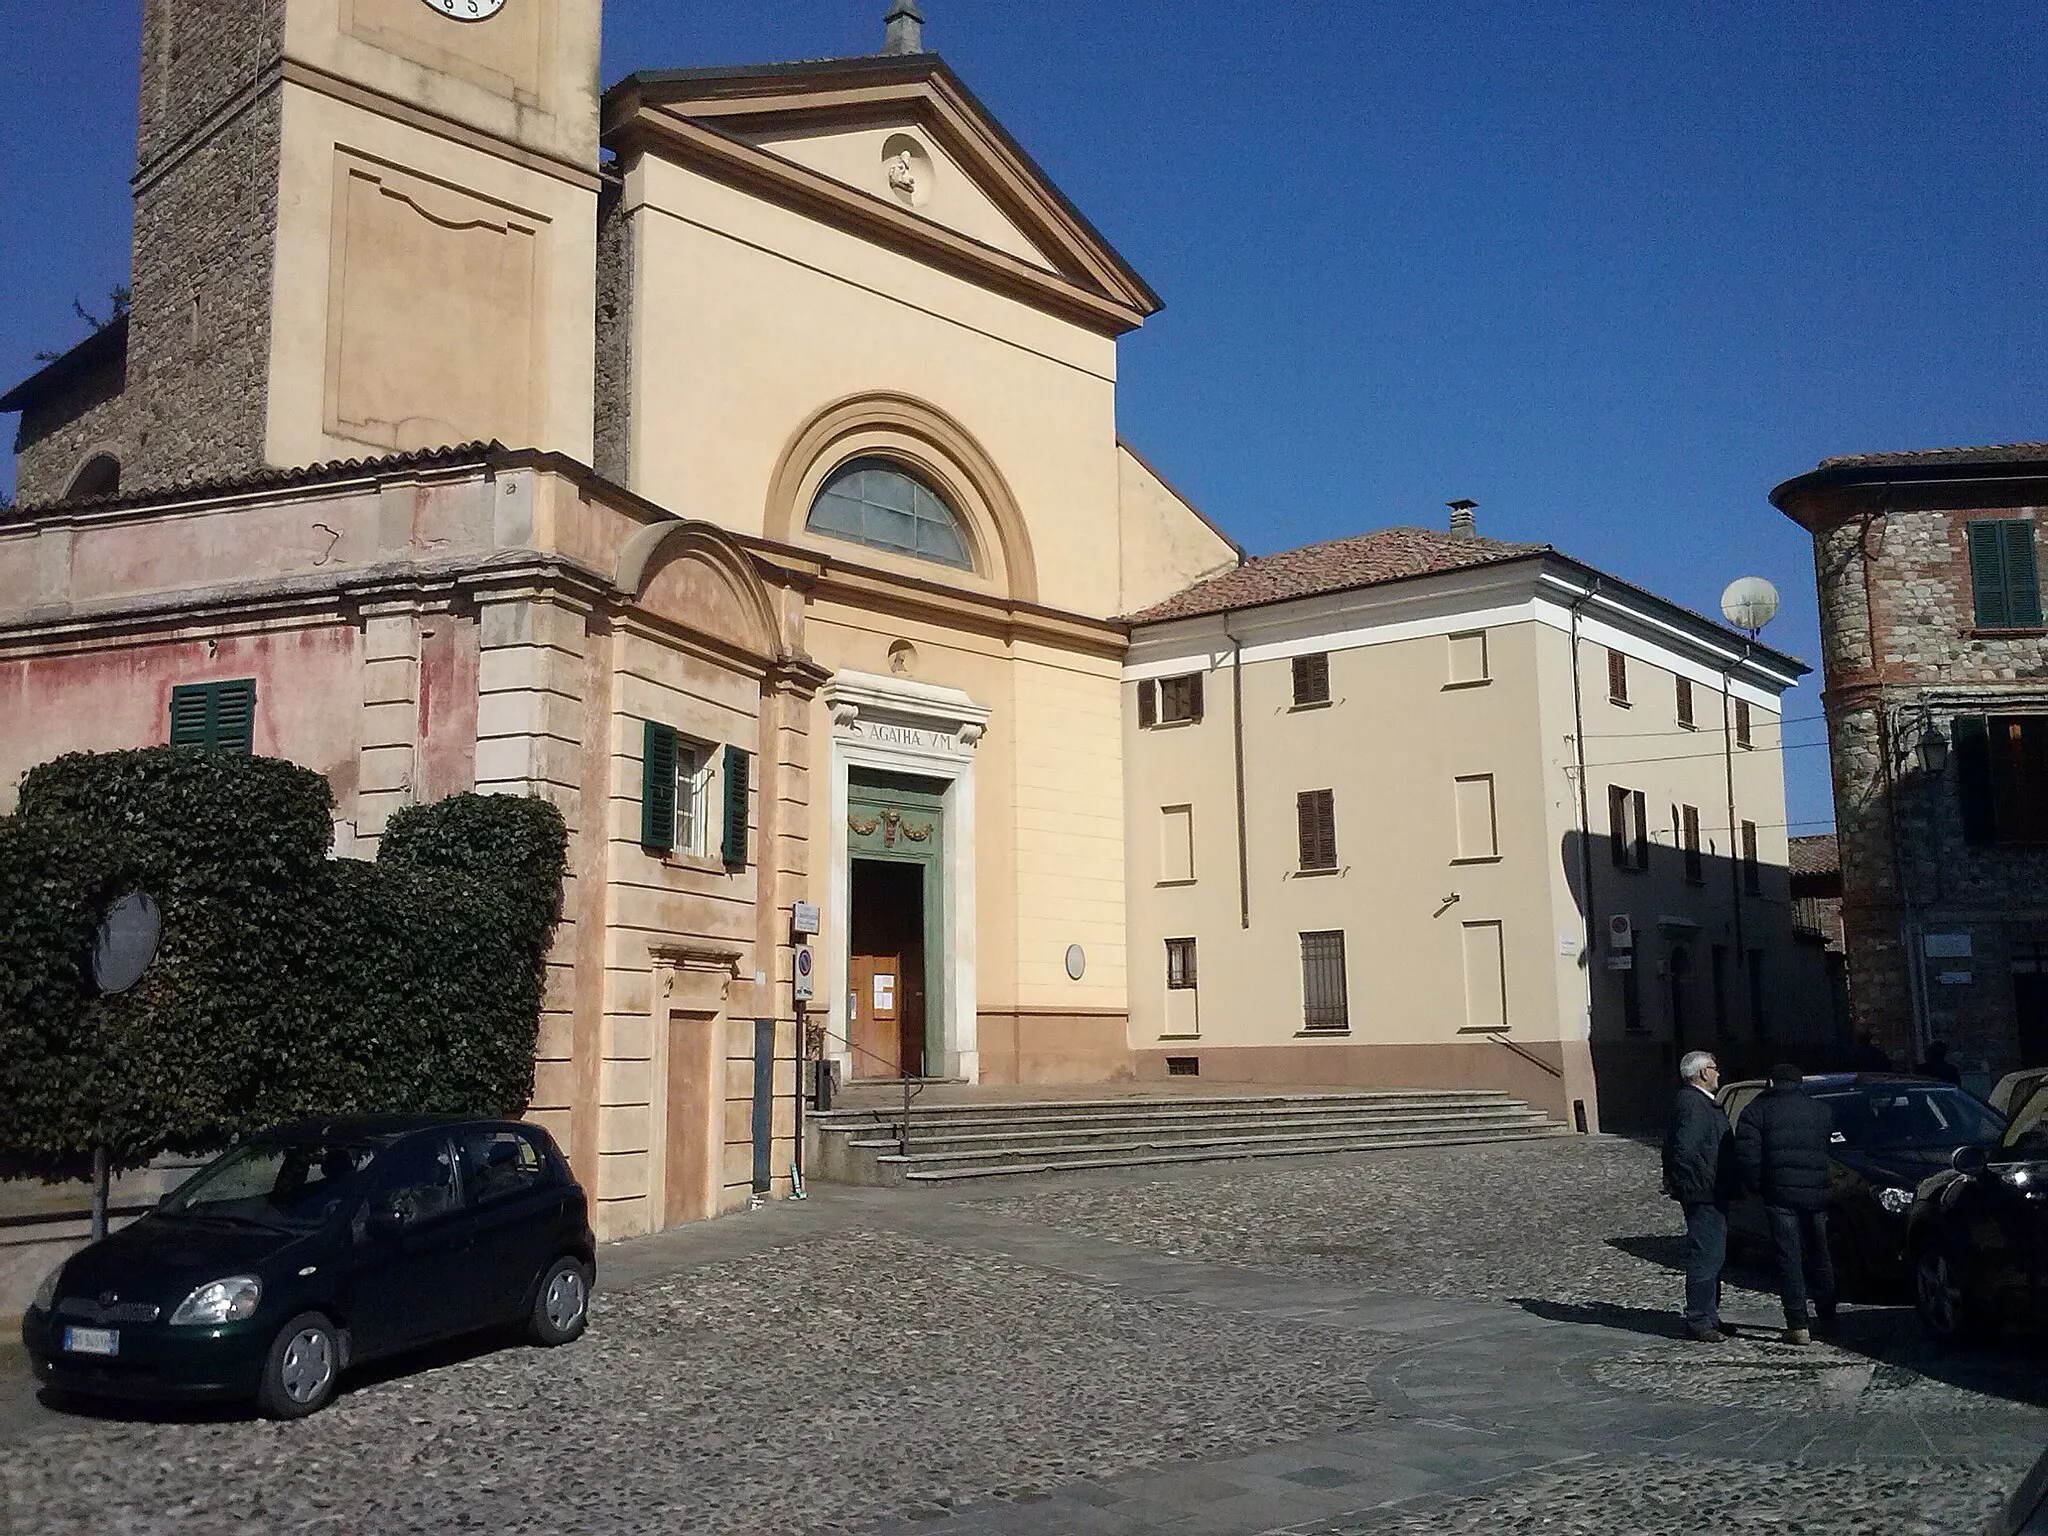 Photo showing: City center of Rivergaro (Piacenza, Italy) and the Church of Saint Agatha